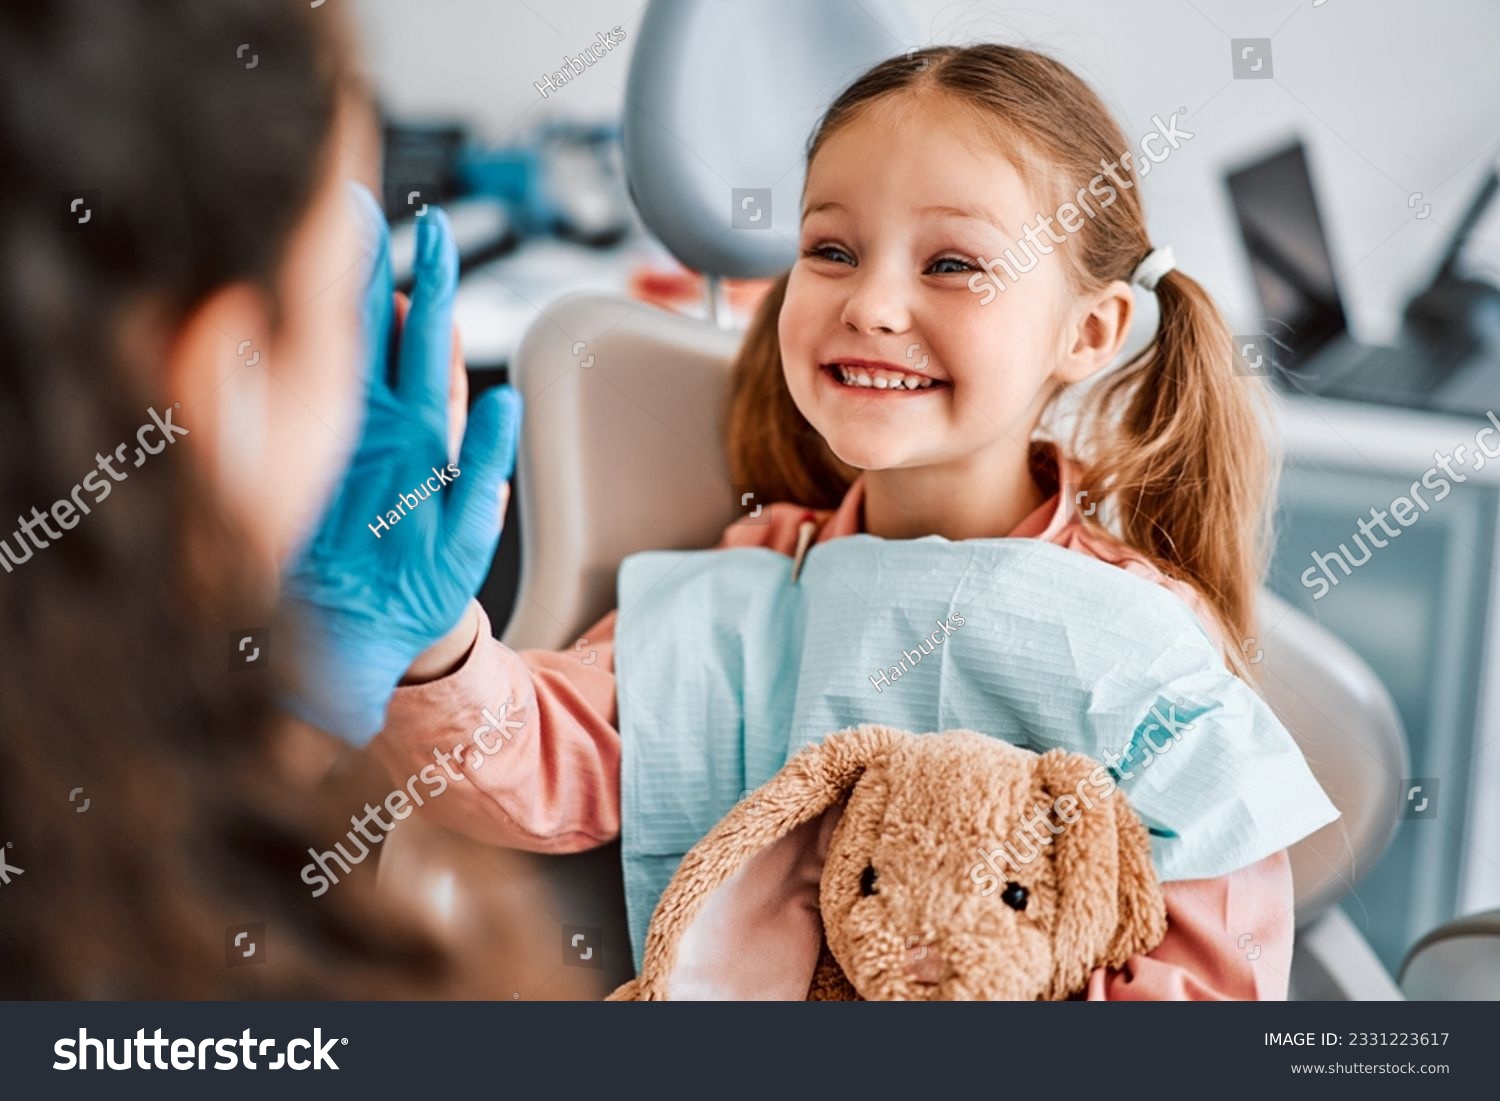 At the doctor's appointment. A candid emotional photo of a child sitting in a dental chair, holding a toy rabbit and cheerfully giving a high-five to the nurse. #2331223617